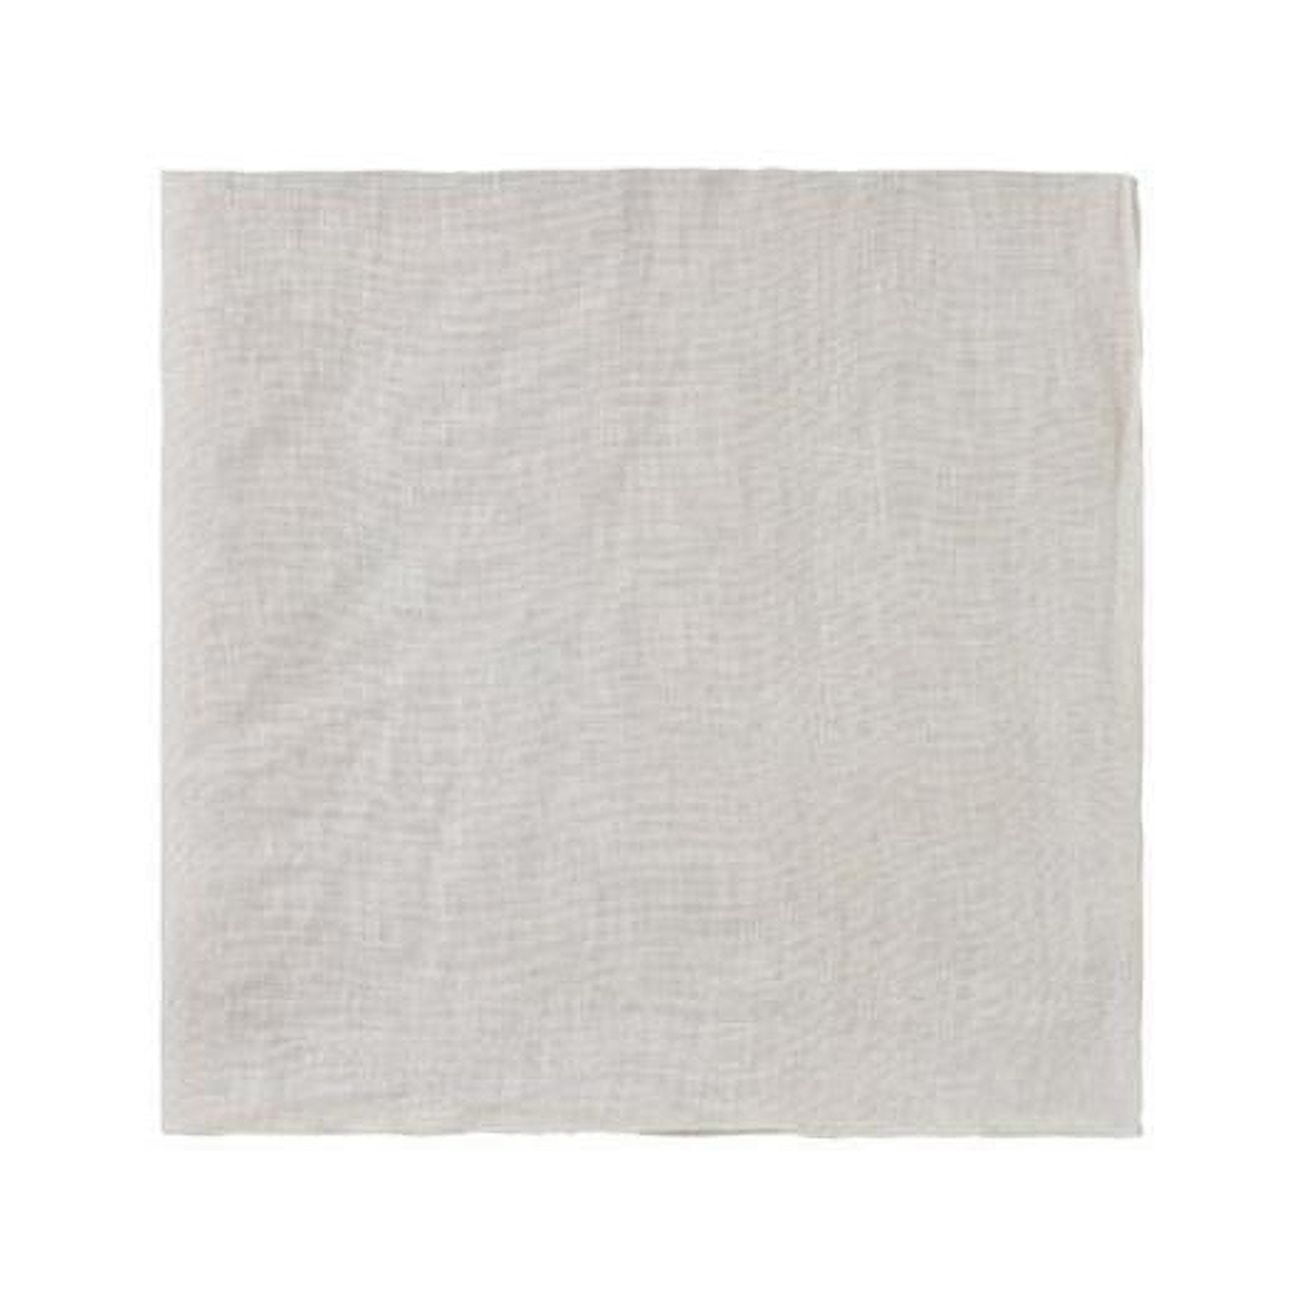 Picture of Blomus 63728.4 17 x 17 in. Lineo Linen Table Napkin, Moonbeam - Set of 4